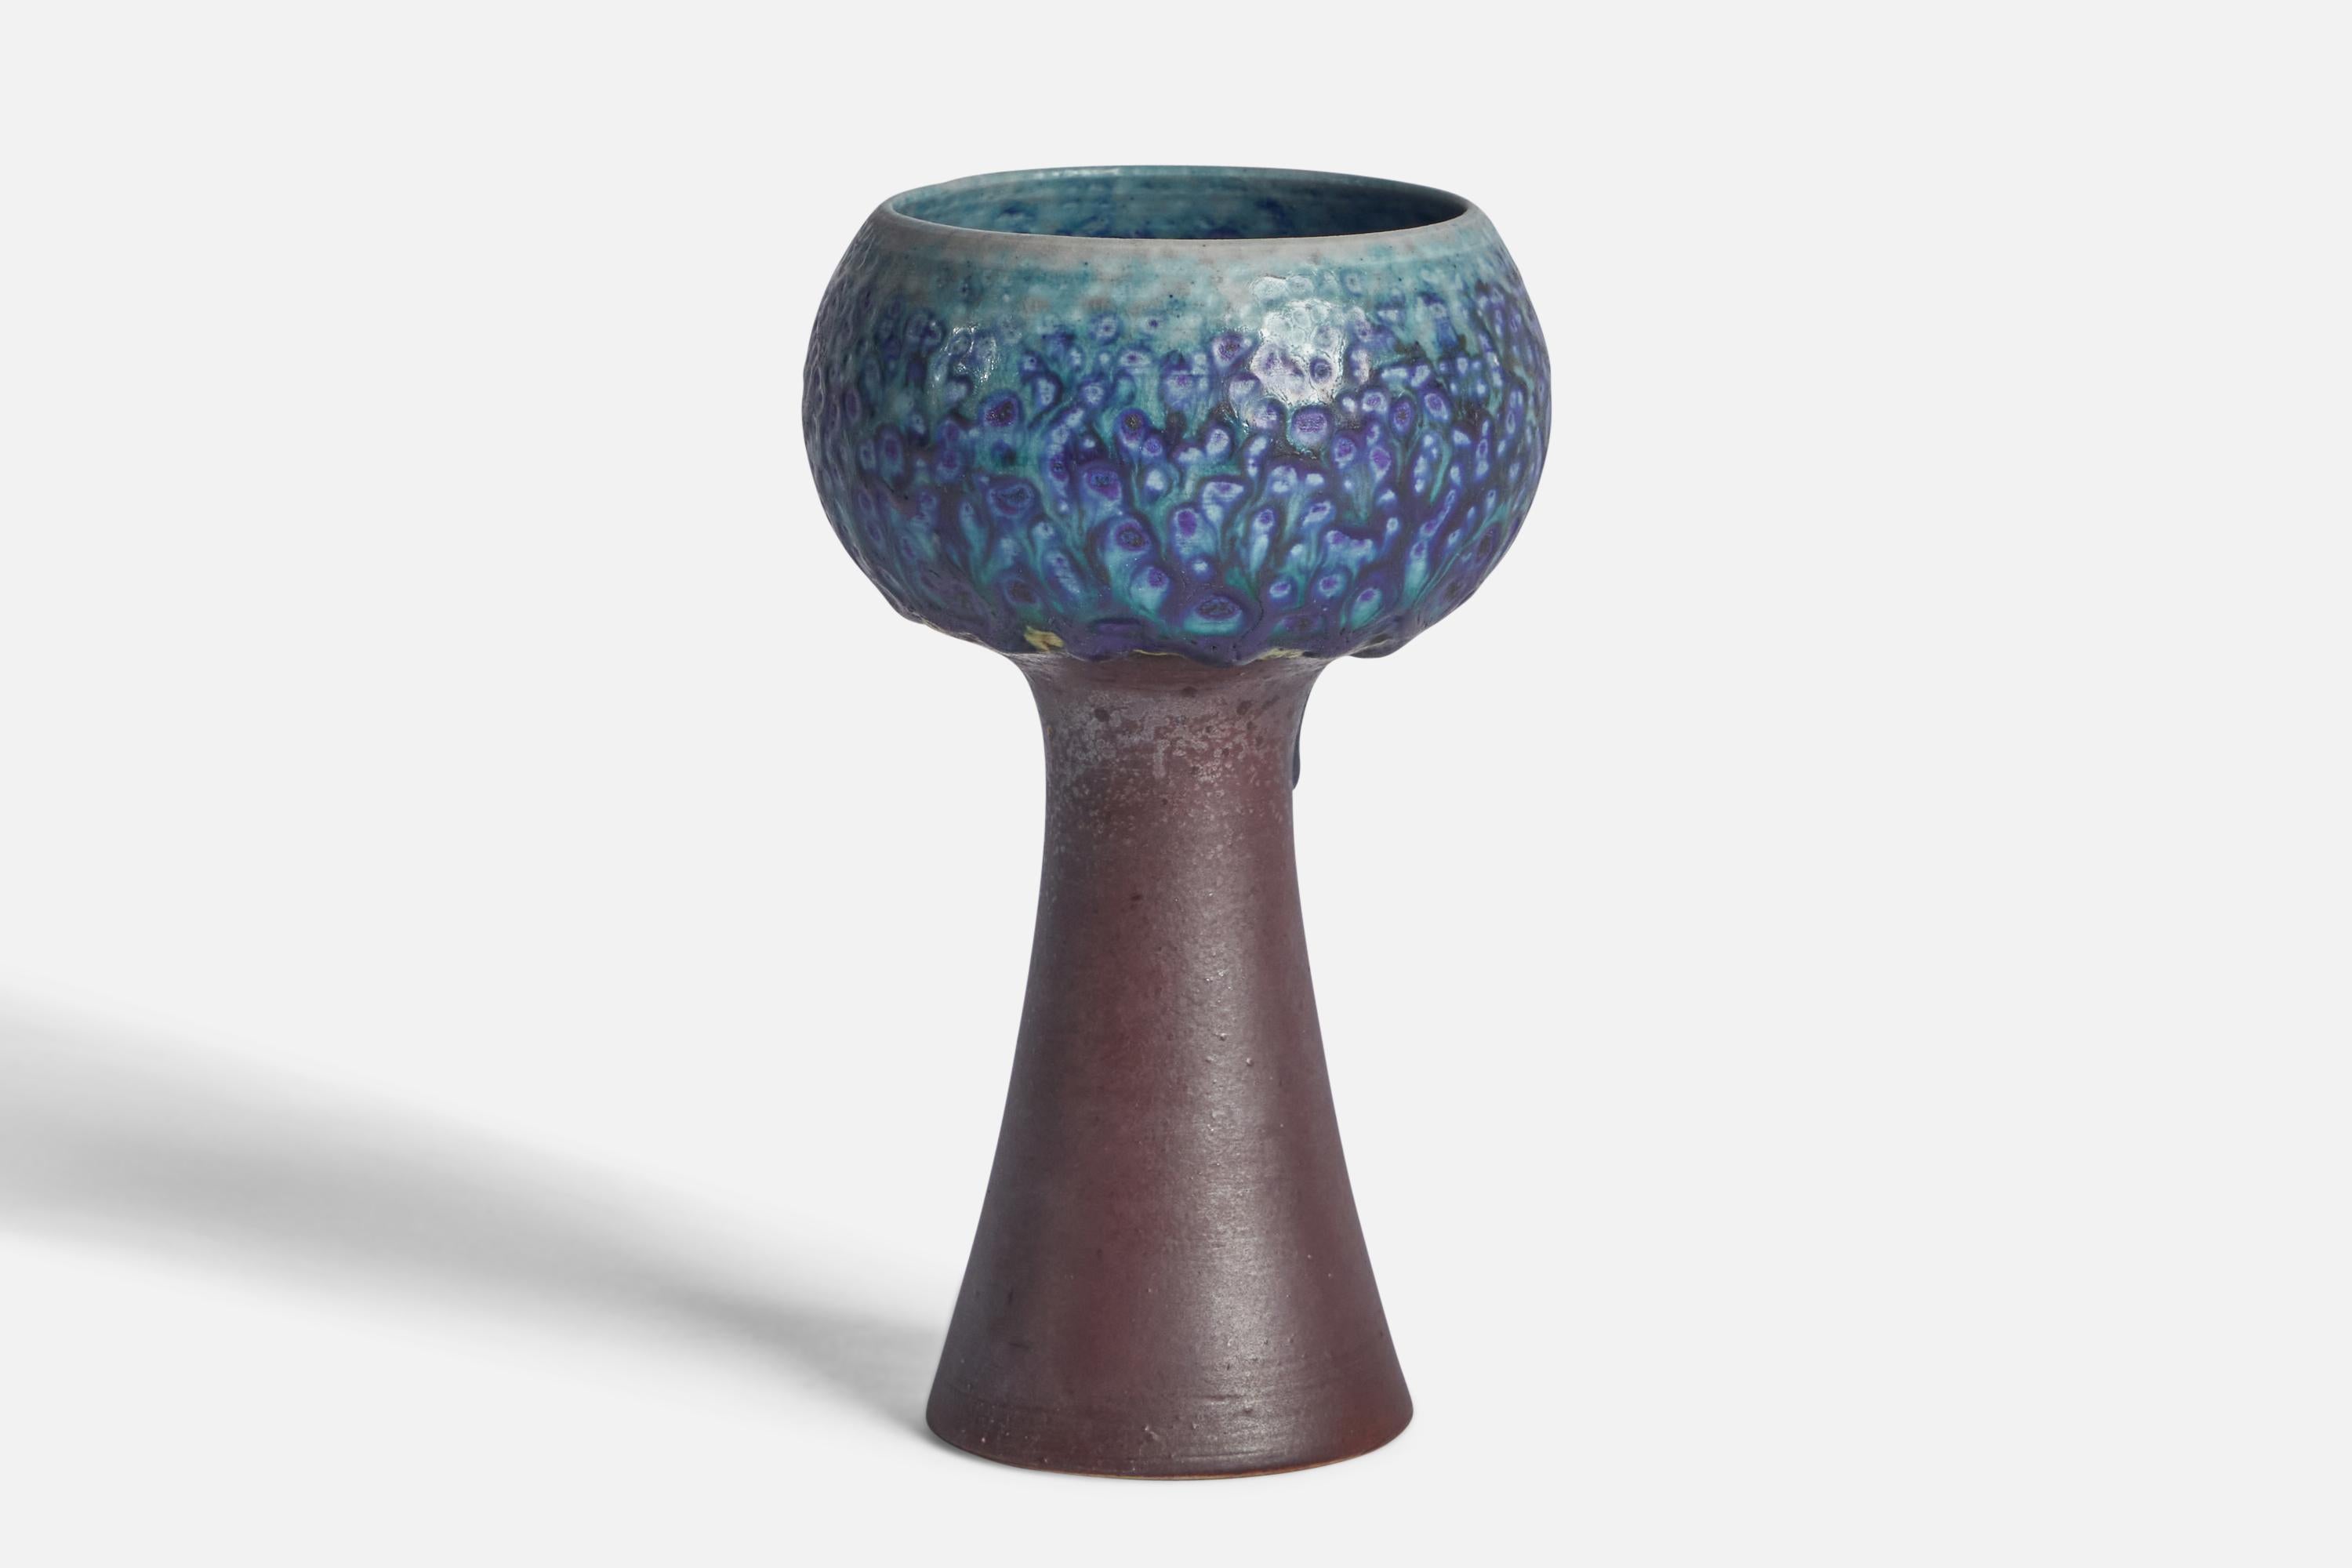 A blue and brown-glazed stoneware vase designed by Lisa Hallamaa and produced by Arabia, Finland, c. 1950s.